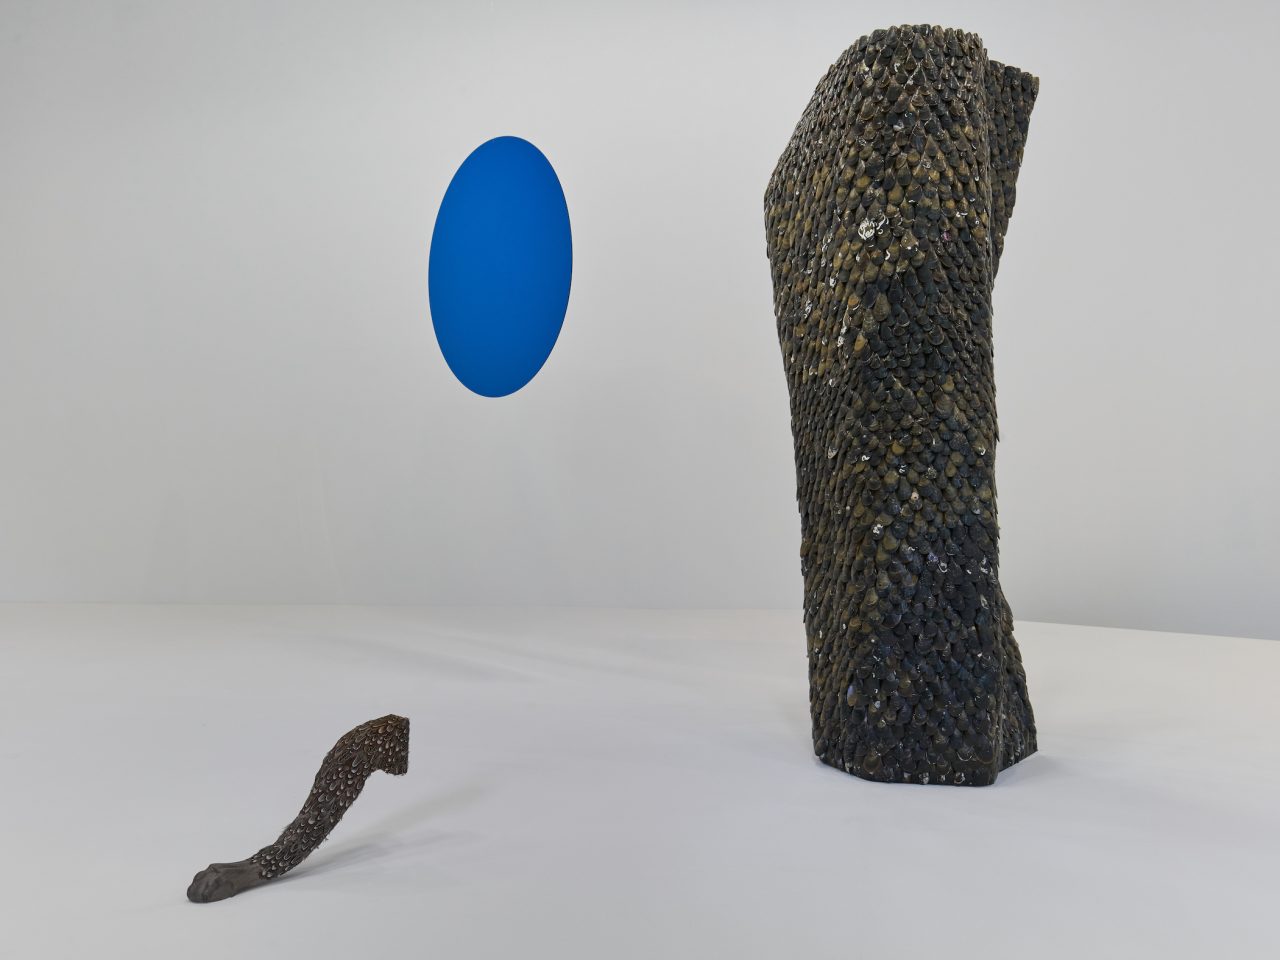 Two sculptures on a white platform, both are carved out of wood, both taking the form of an animalistic limb. There is a blue oval on the wall in the background